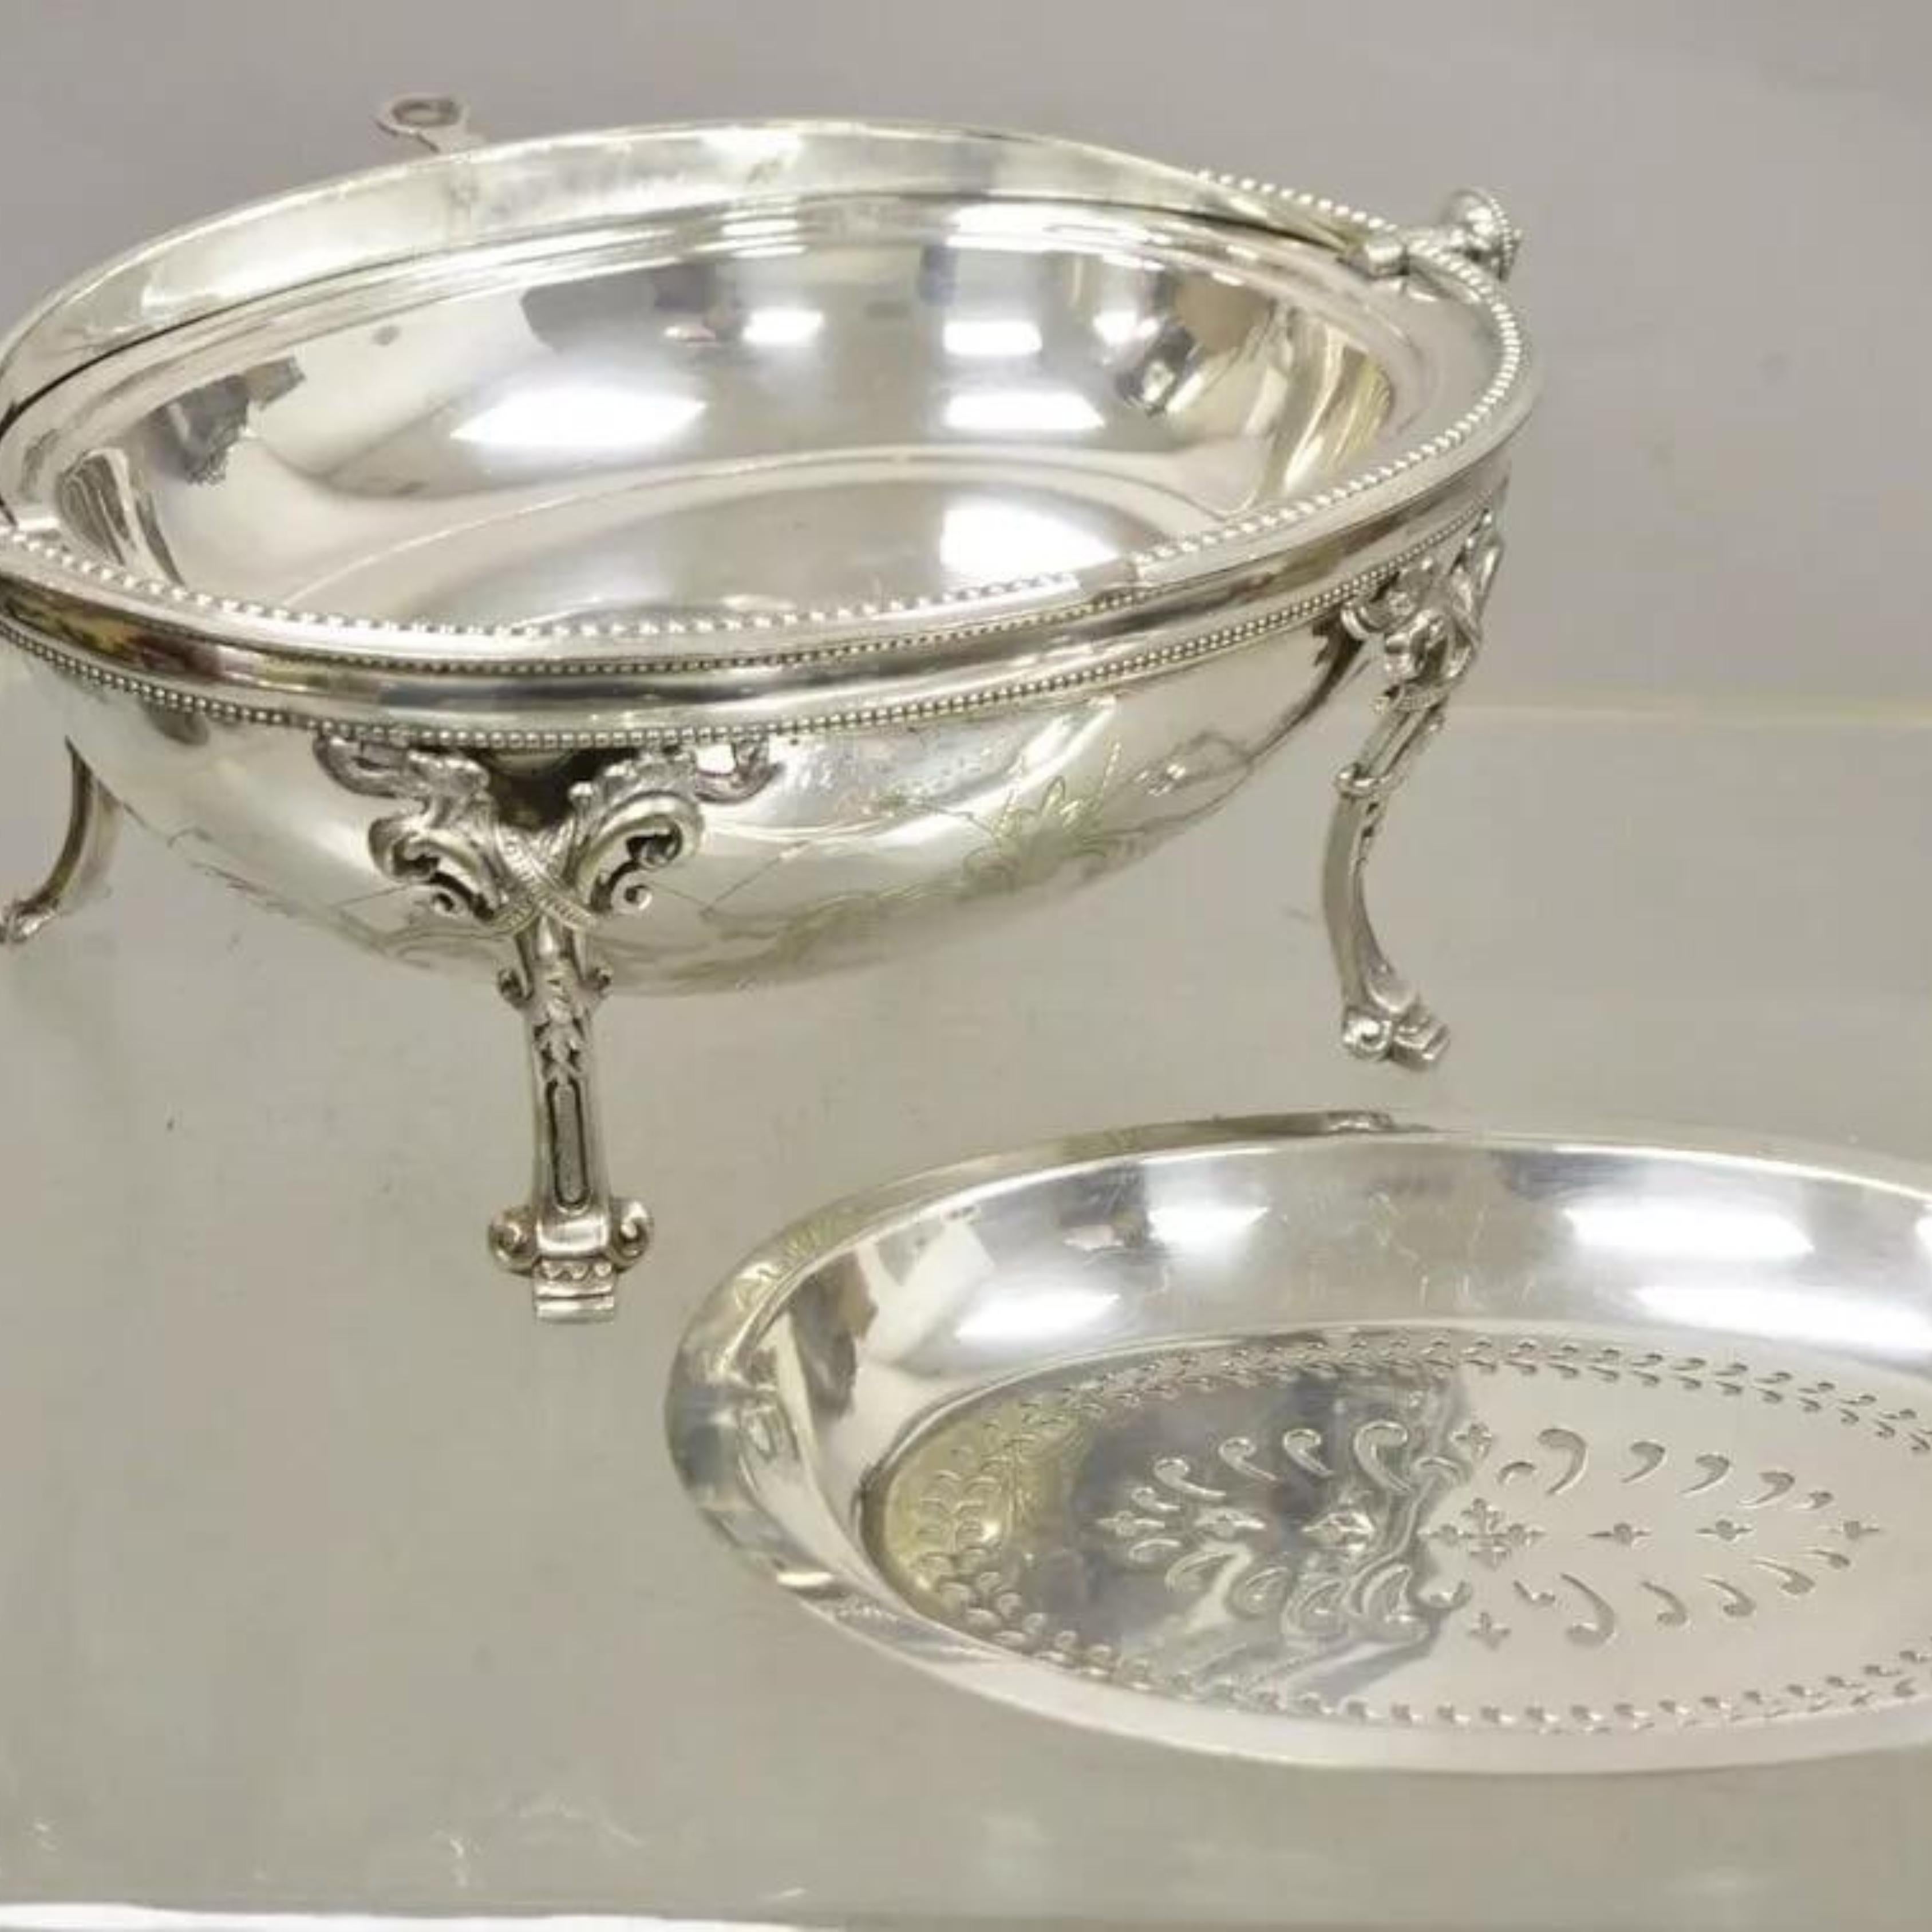 Antique Edwardian Silver Plated Revolving Dome Oval Chafing Dish Food Warmer. Item features Monogram etching 